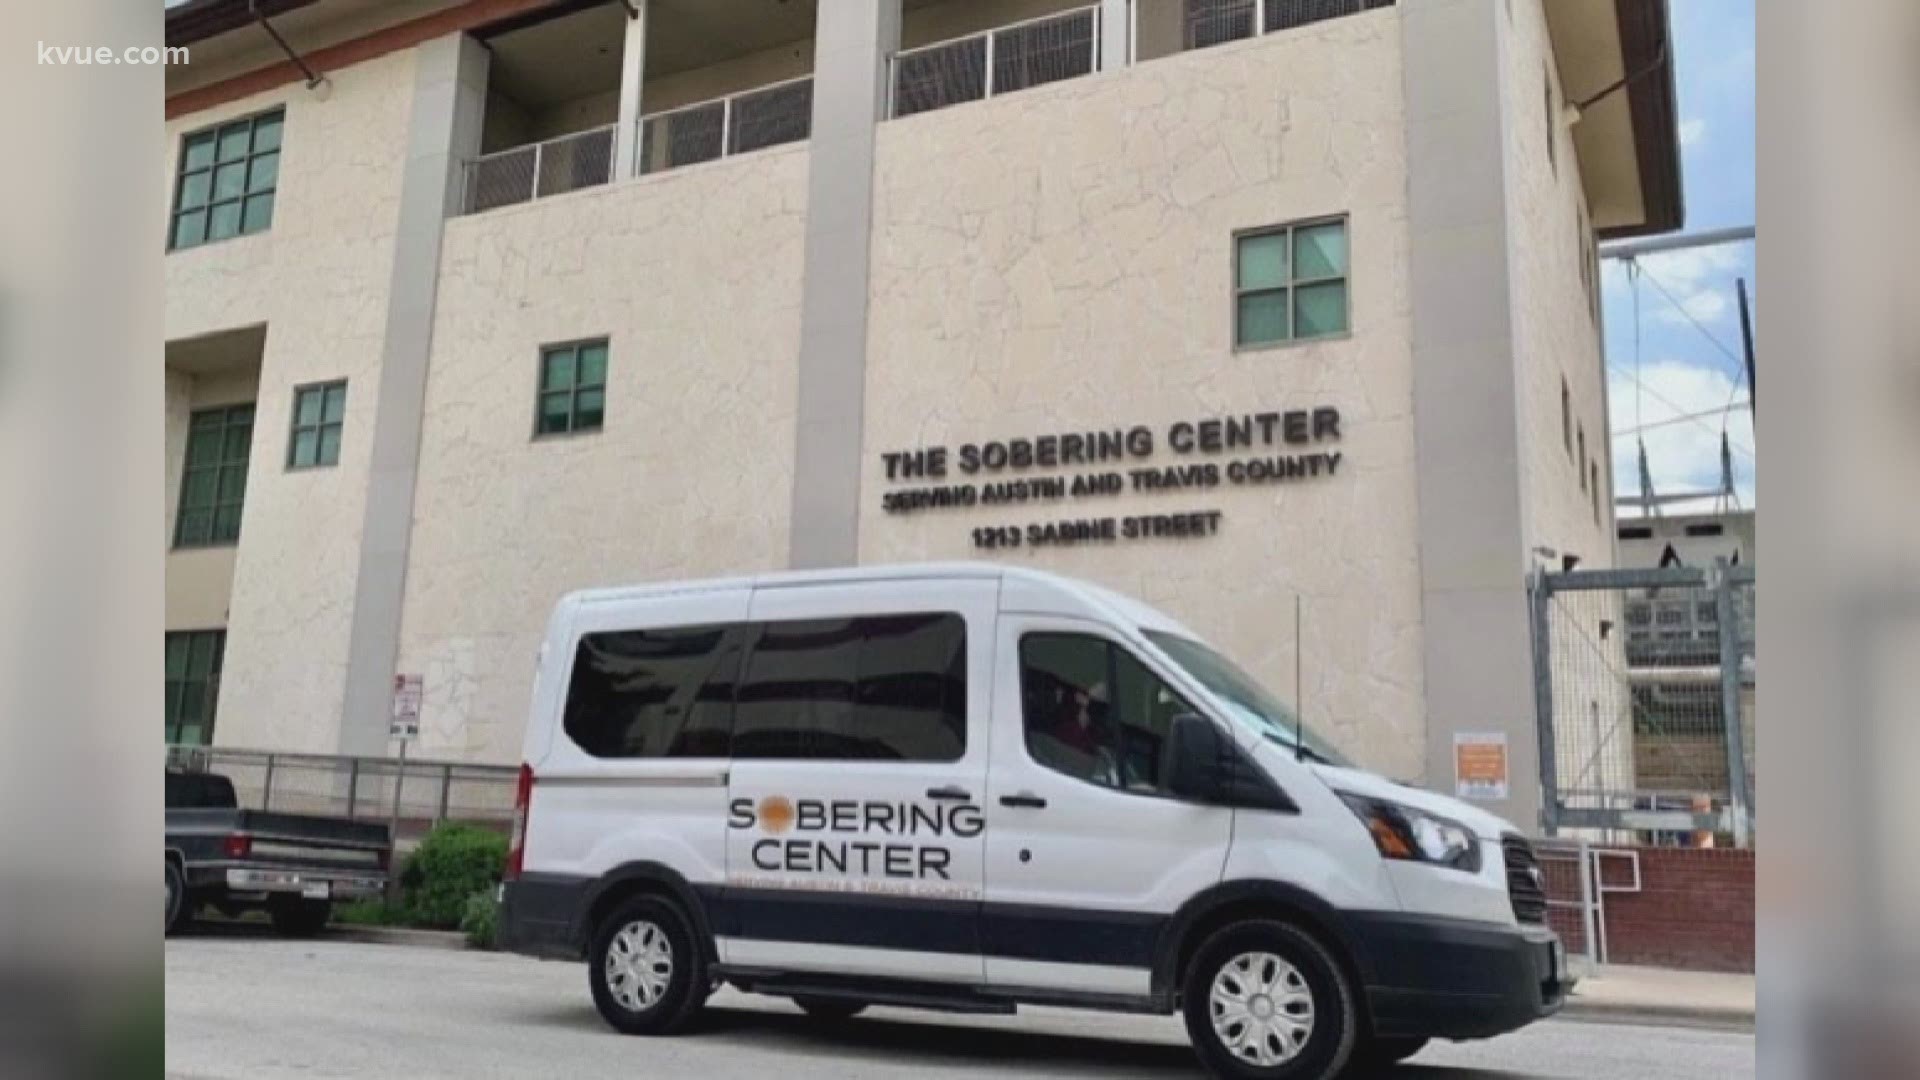 The Sobering Center is offering free rides from Sixth Street to its facility on Saturday night. It will have a tent set up for those needing services.